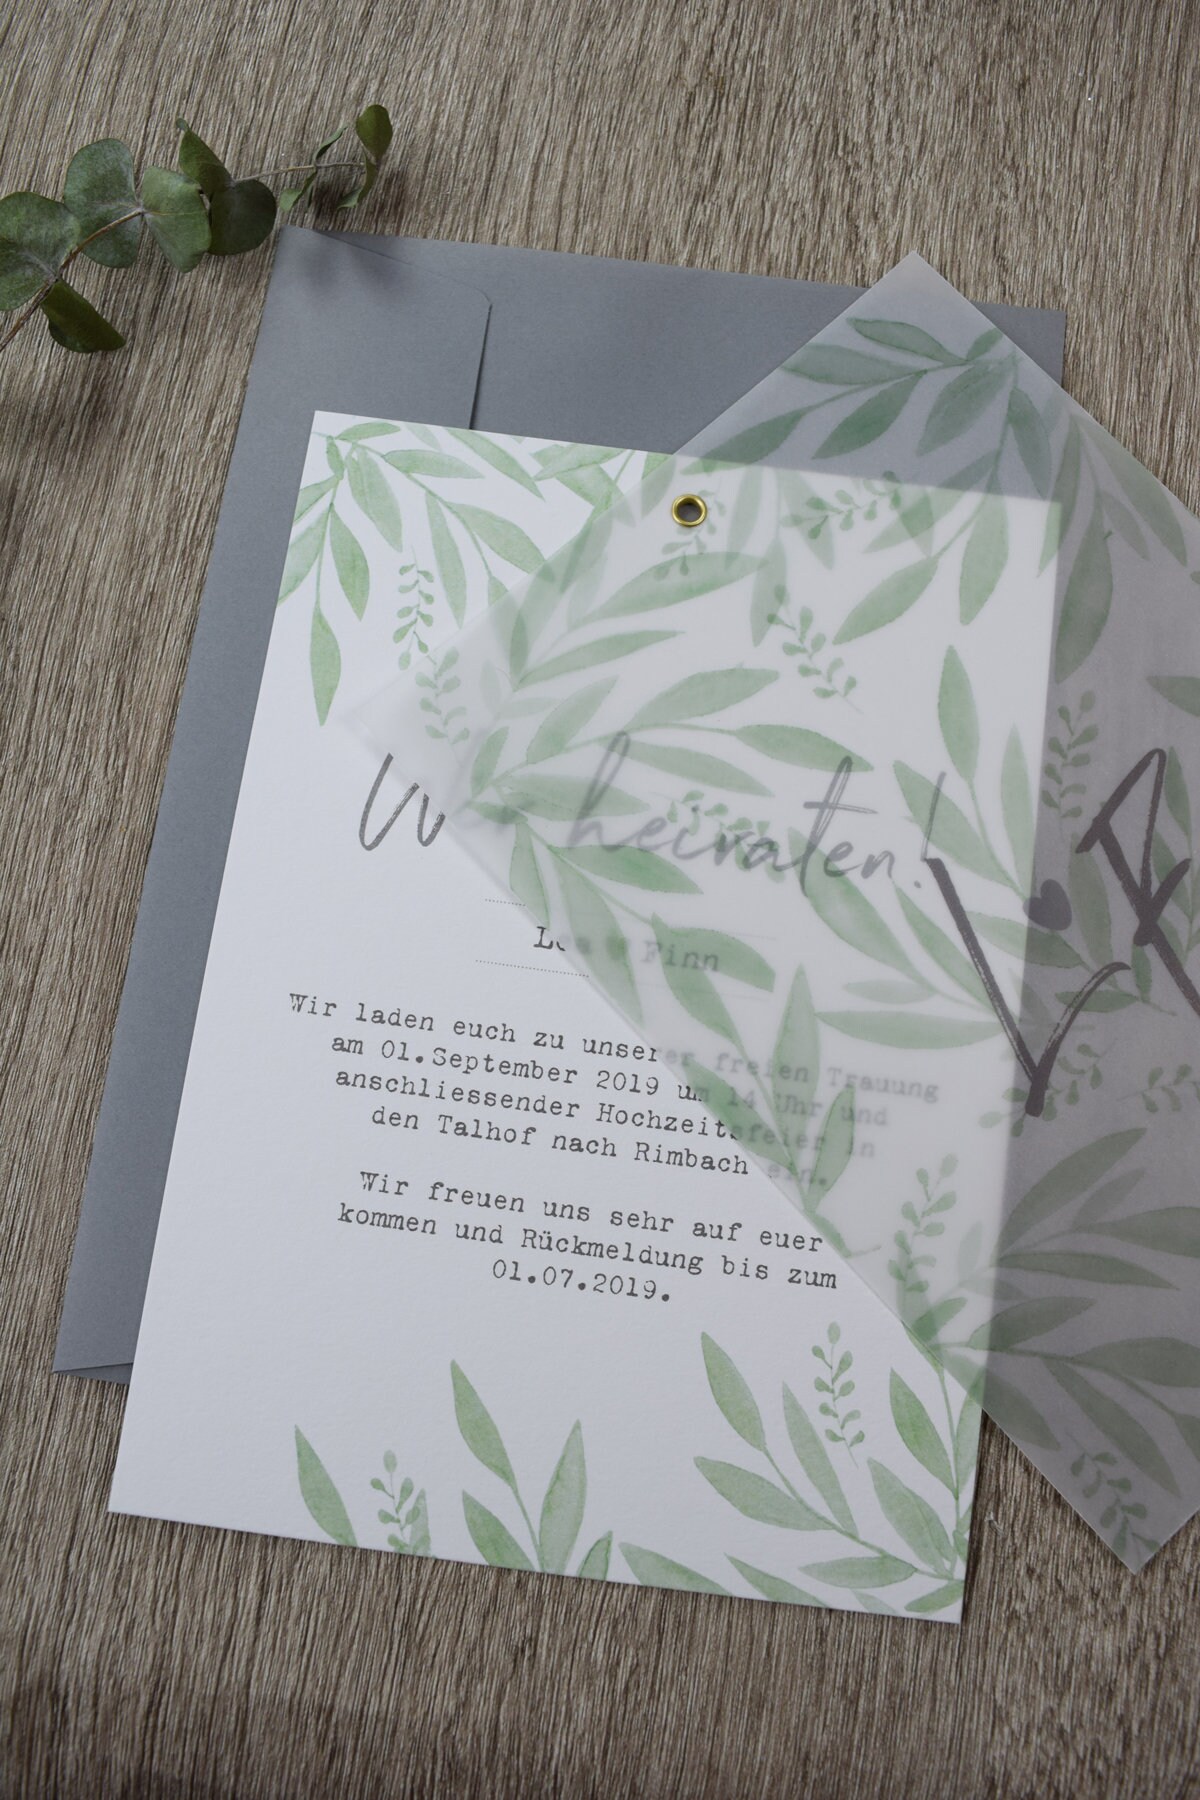 A Glossary of Important Wedding Invitation Terms